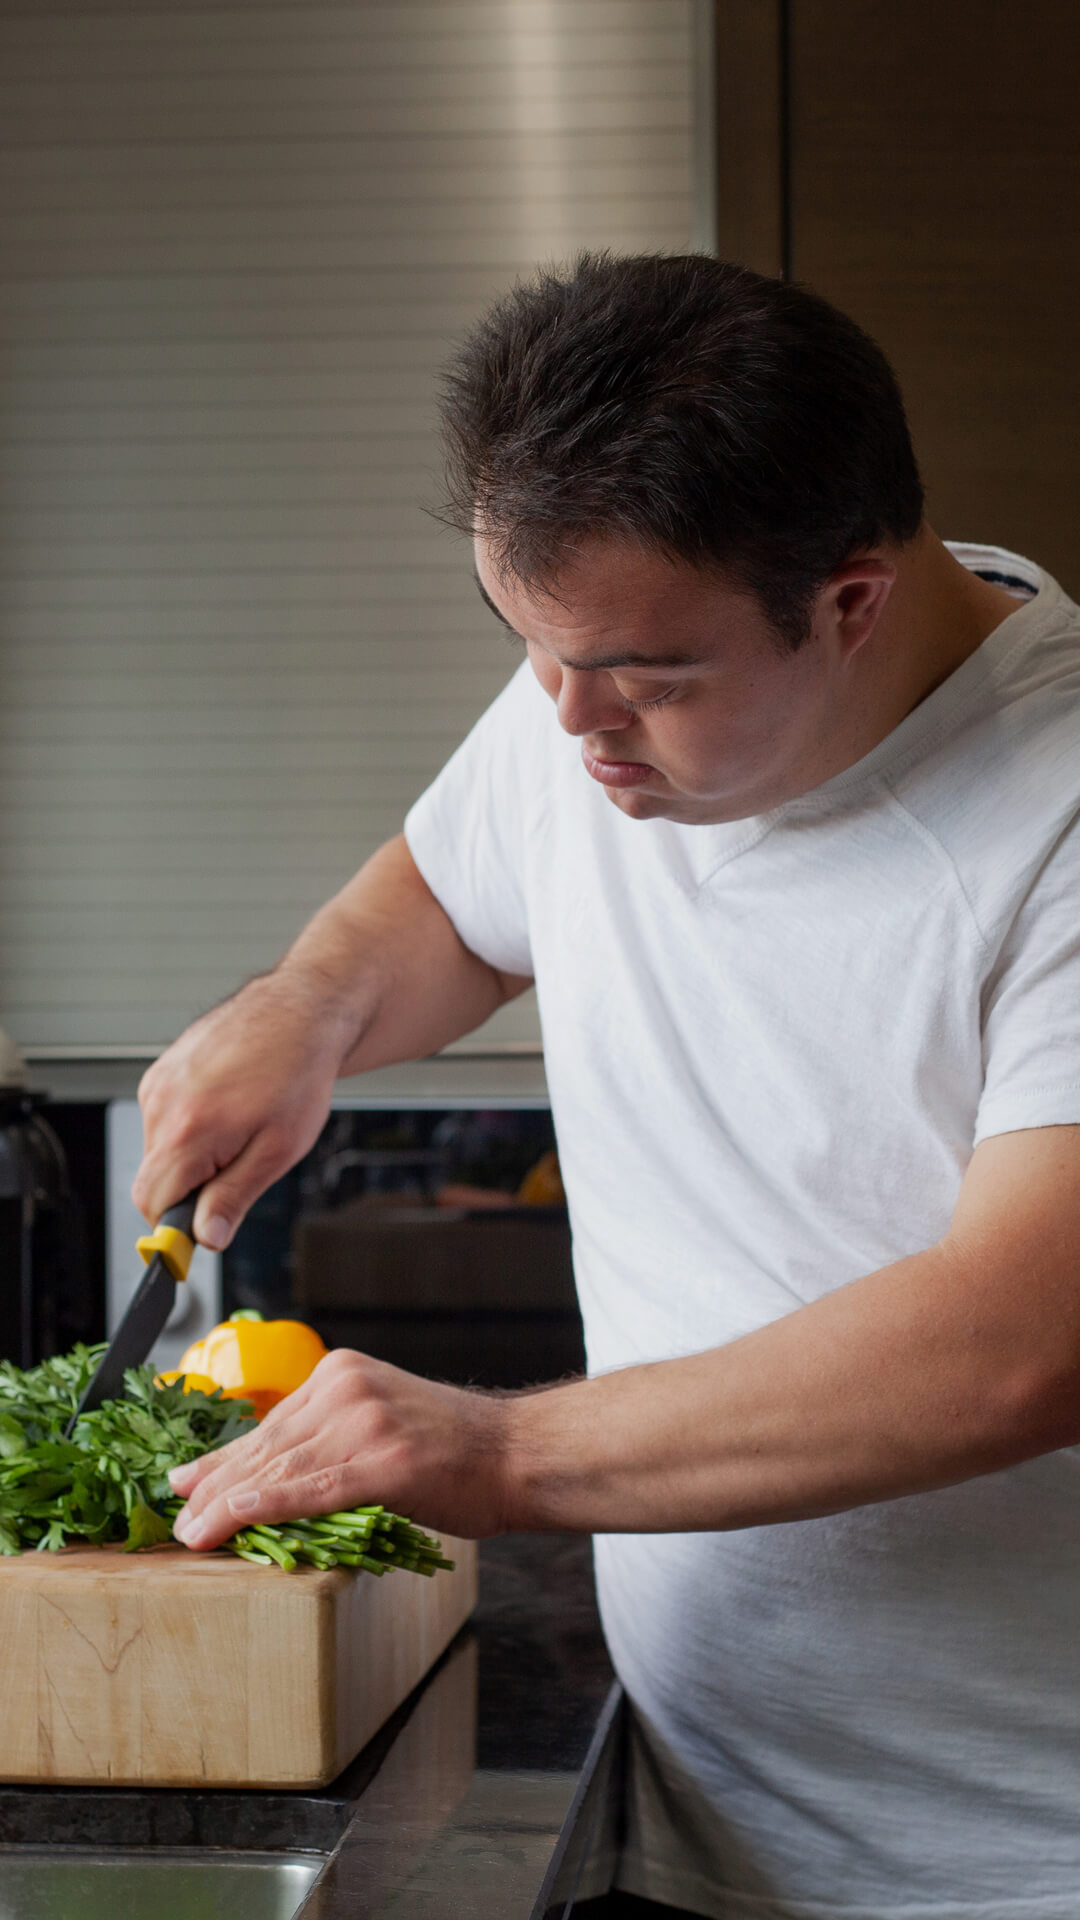 Man focused on chopping vegetables in a kitchen.